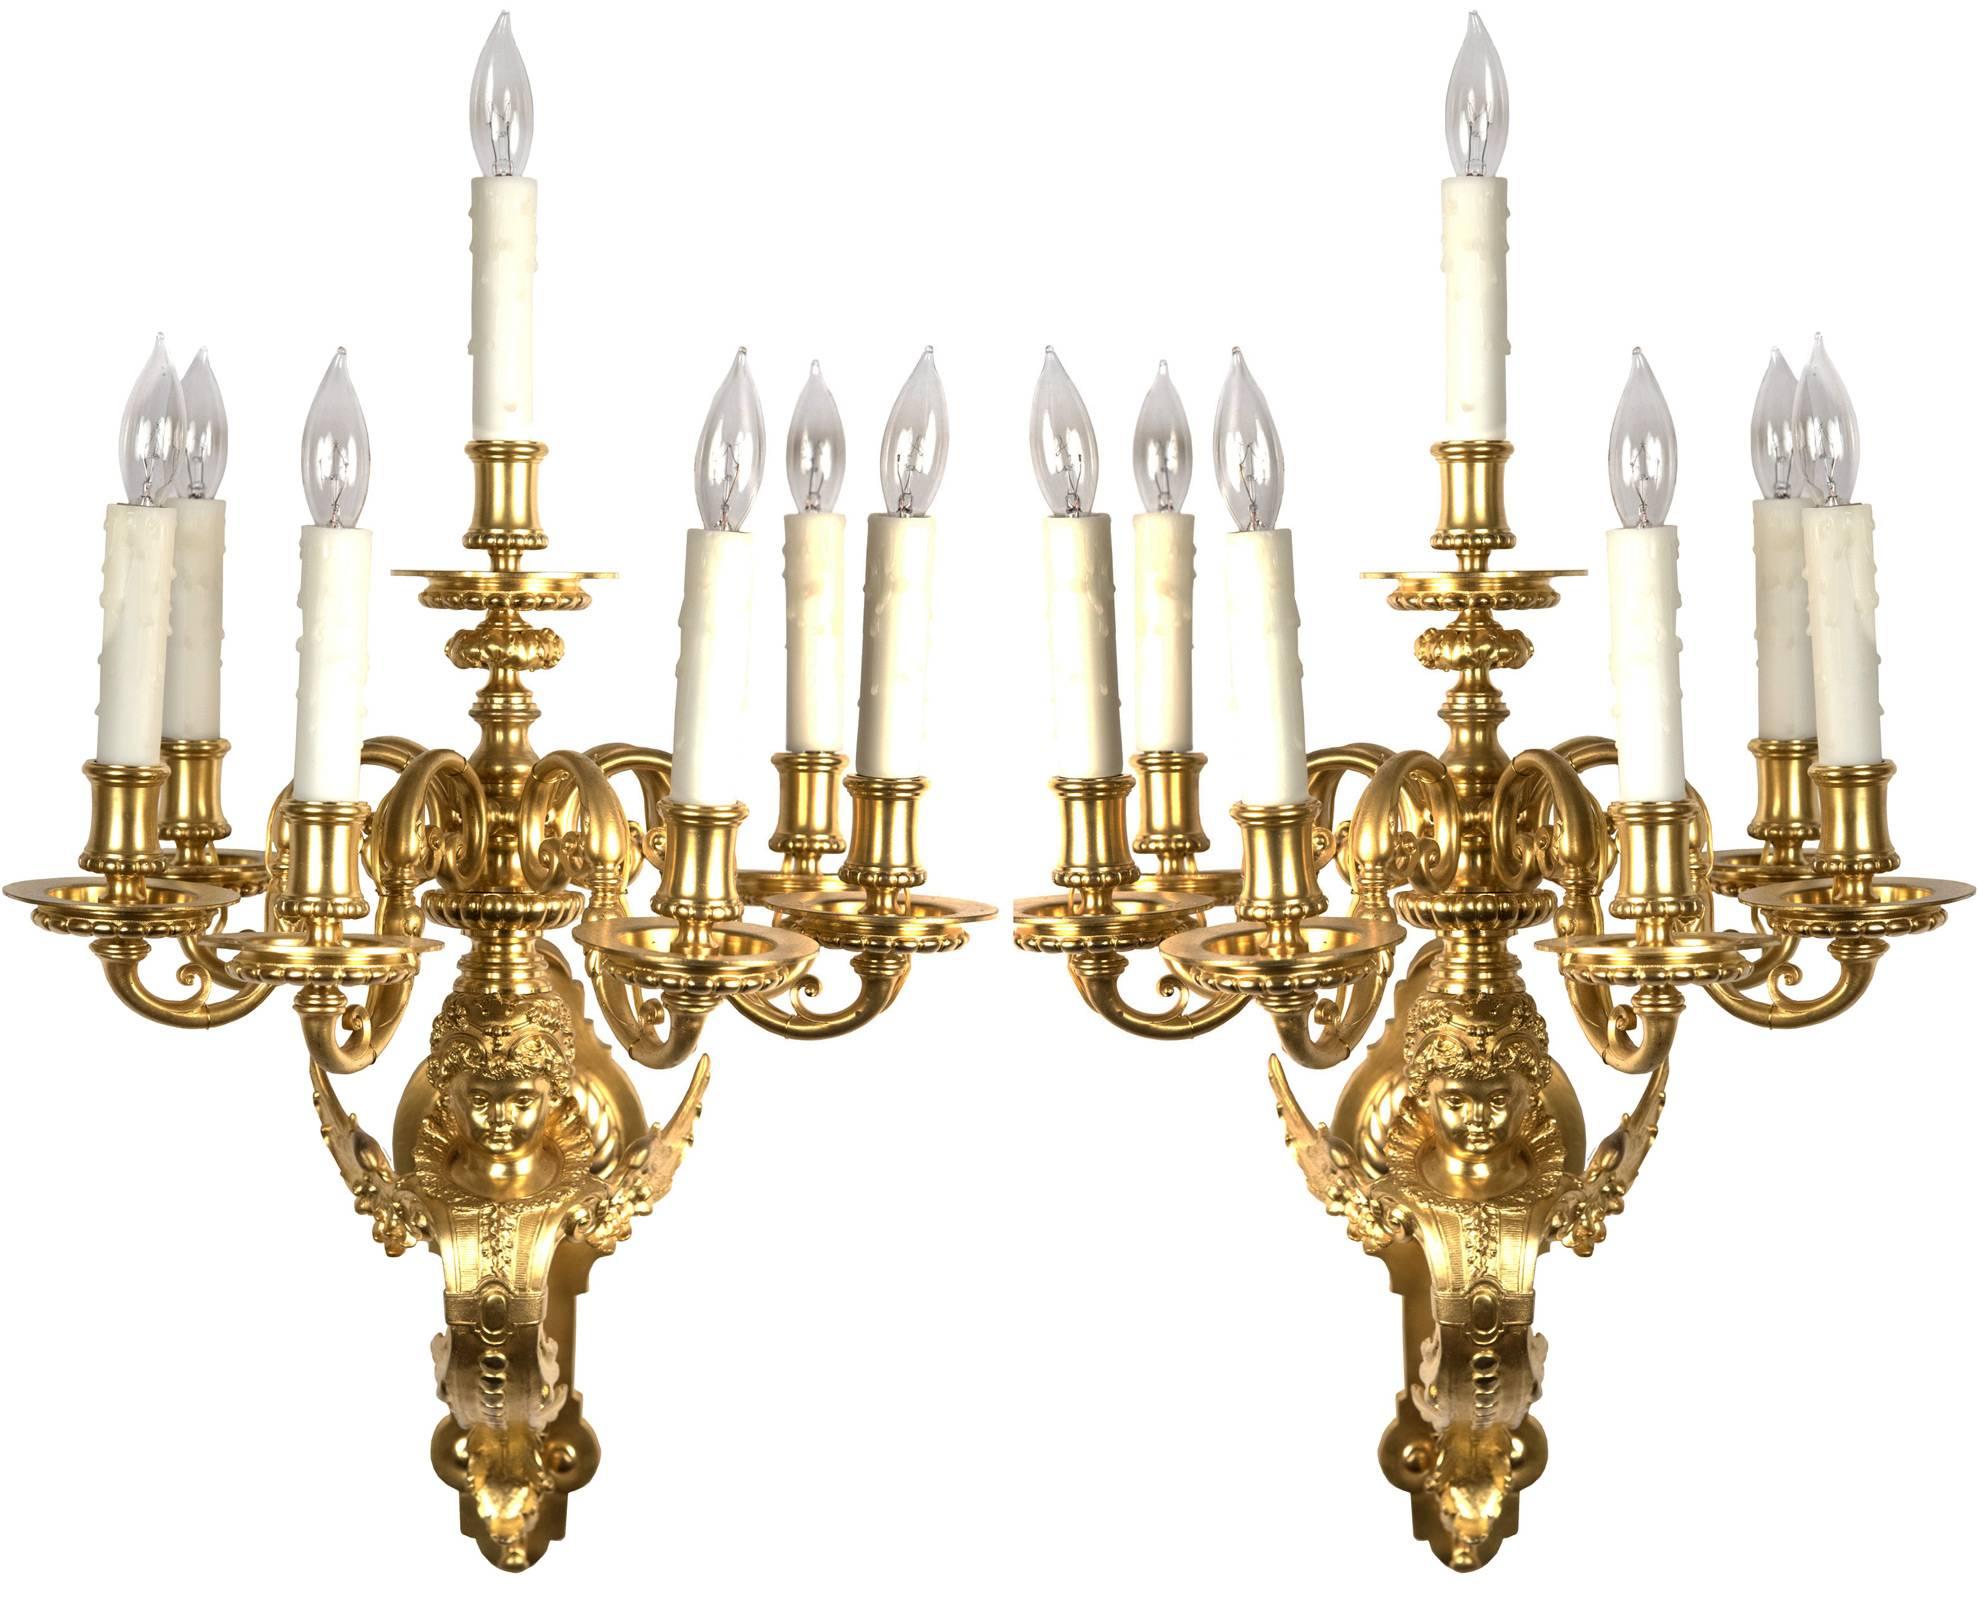 Each featuring an angel dressed in Renaissance garb and seven candle holders, these sconces bear the craftsmanship of an academically-trained sculptor.